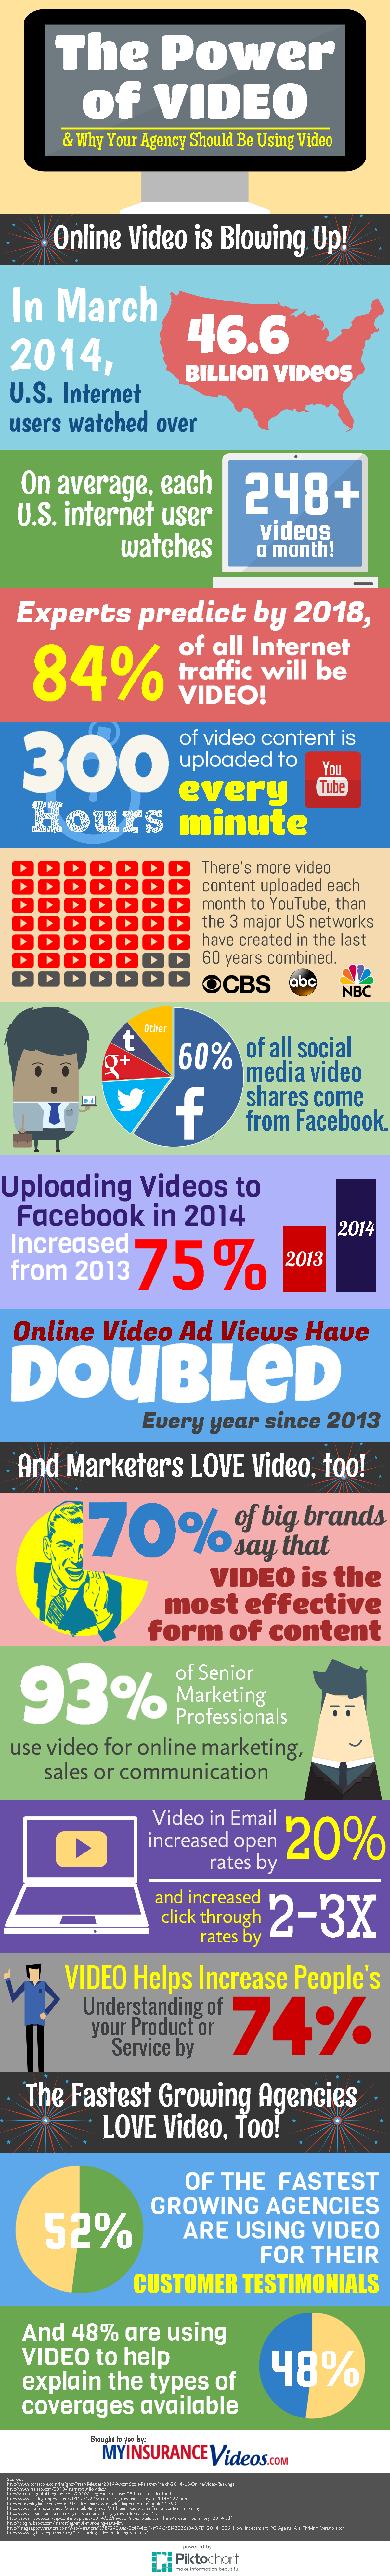 The Power of Video Infographic FINAL